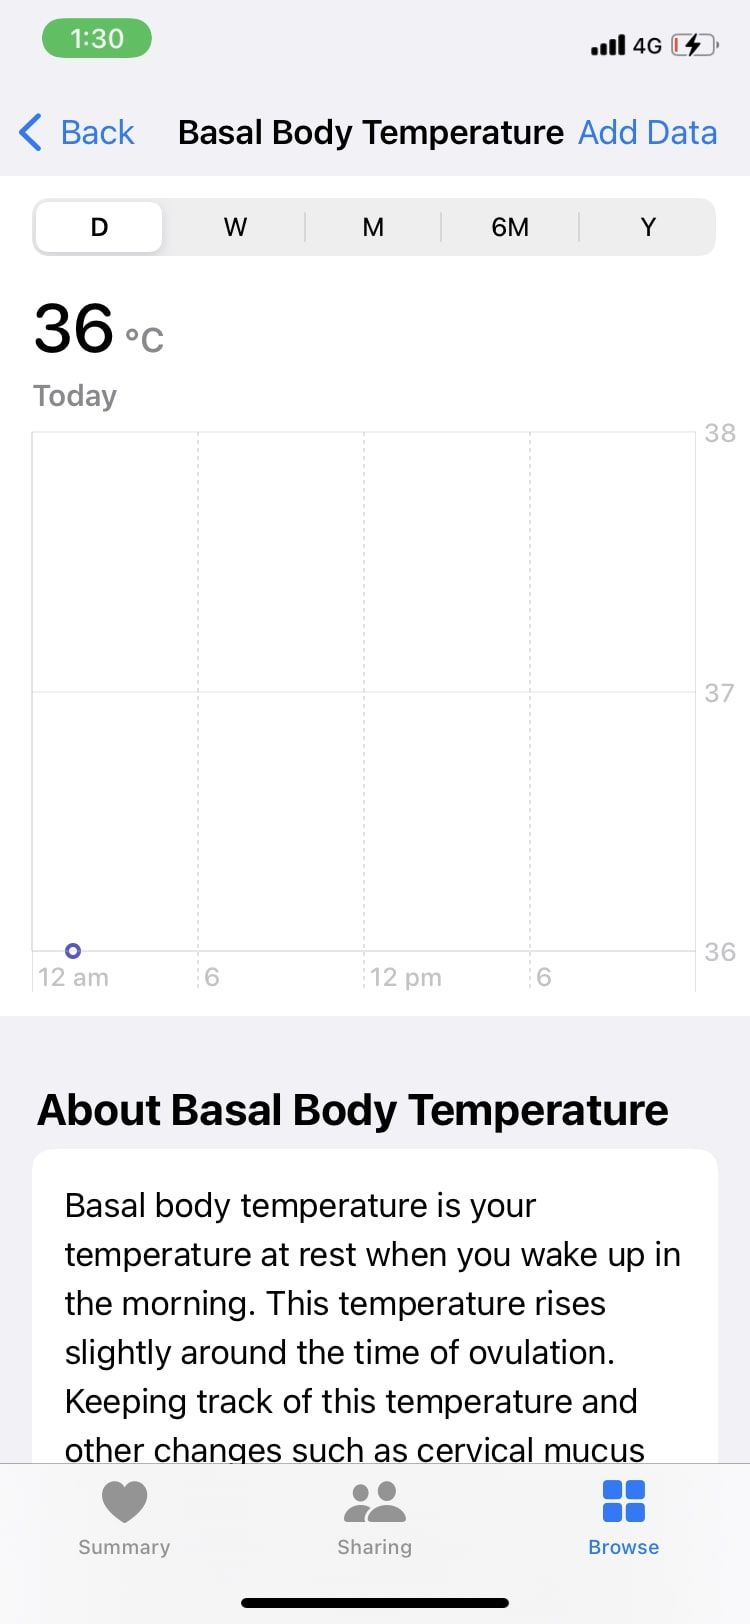 plotted point on basal body temperature iPhone Health app